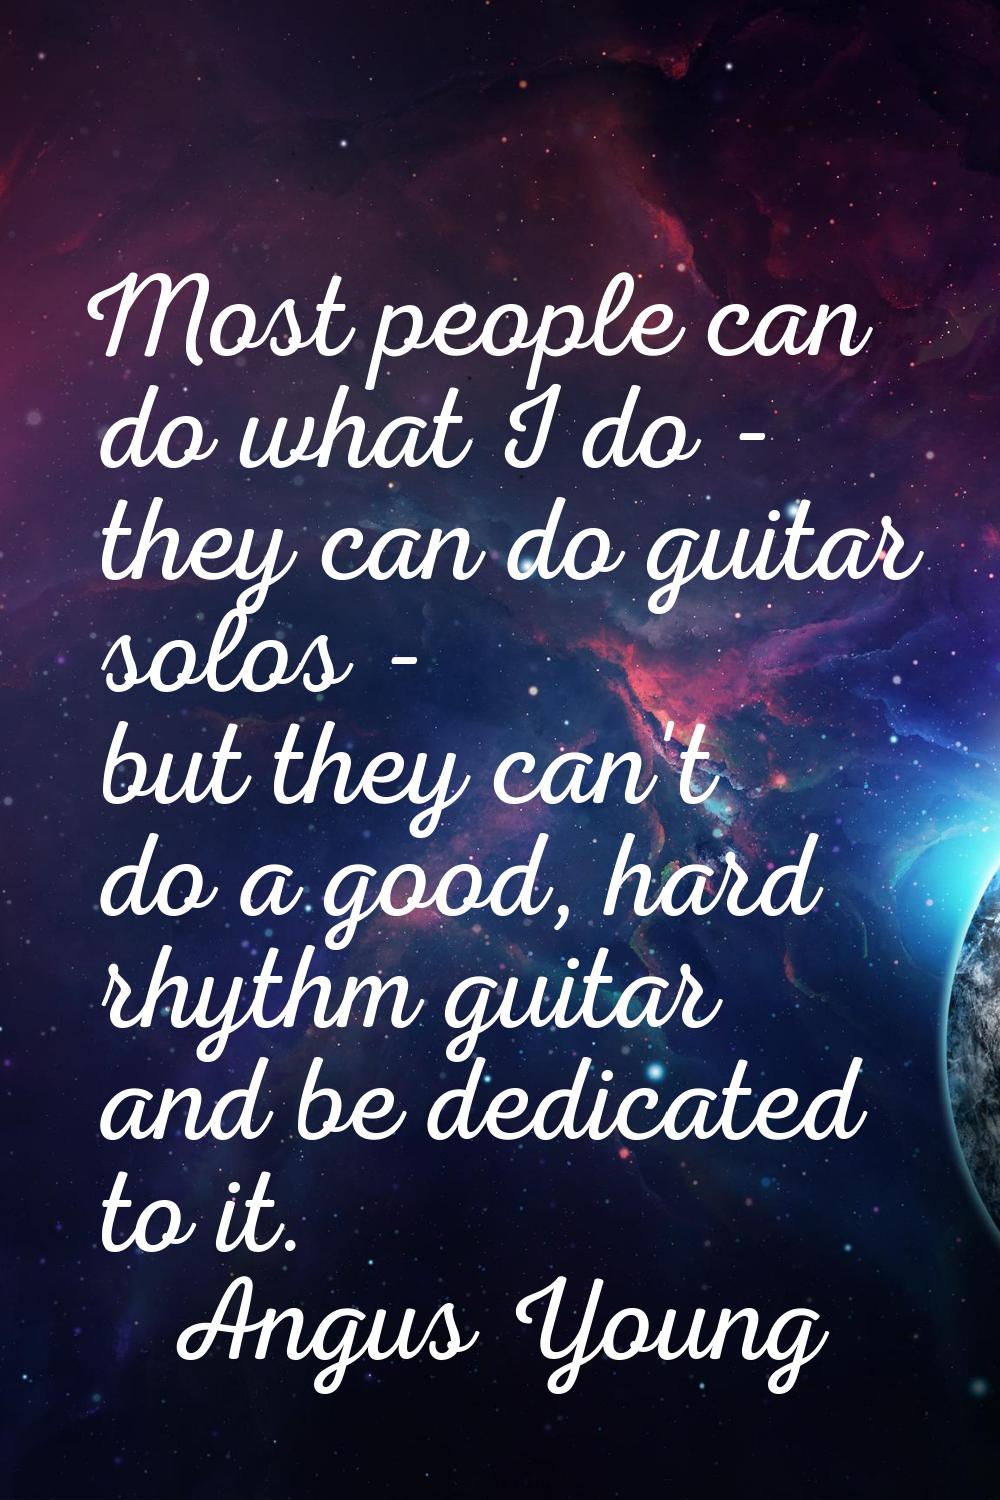 Most people can do what I do - they can do guitar solos - but they can't do a good, hard rhythm gui